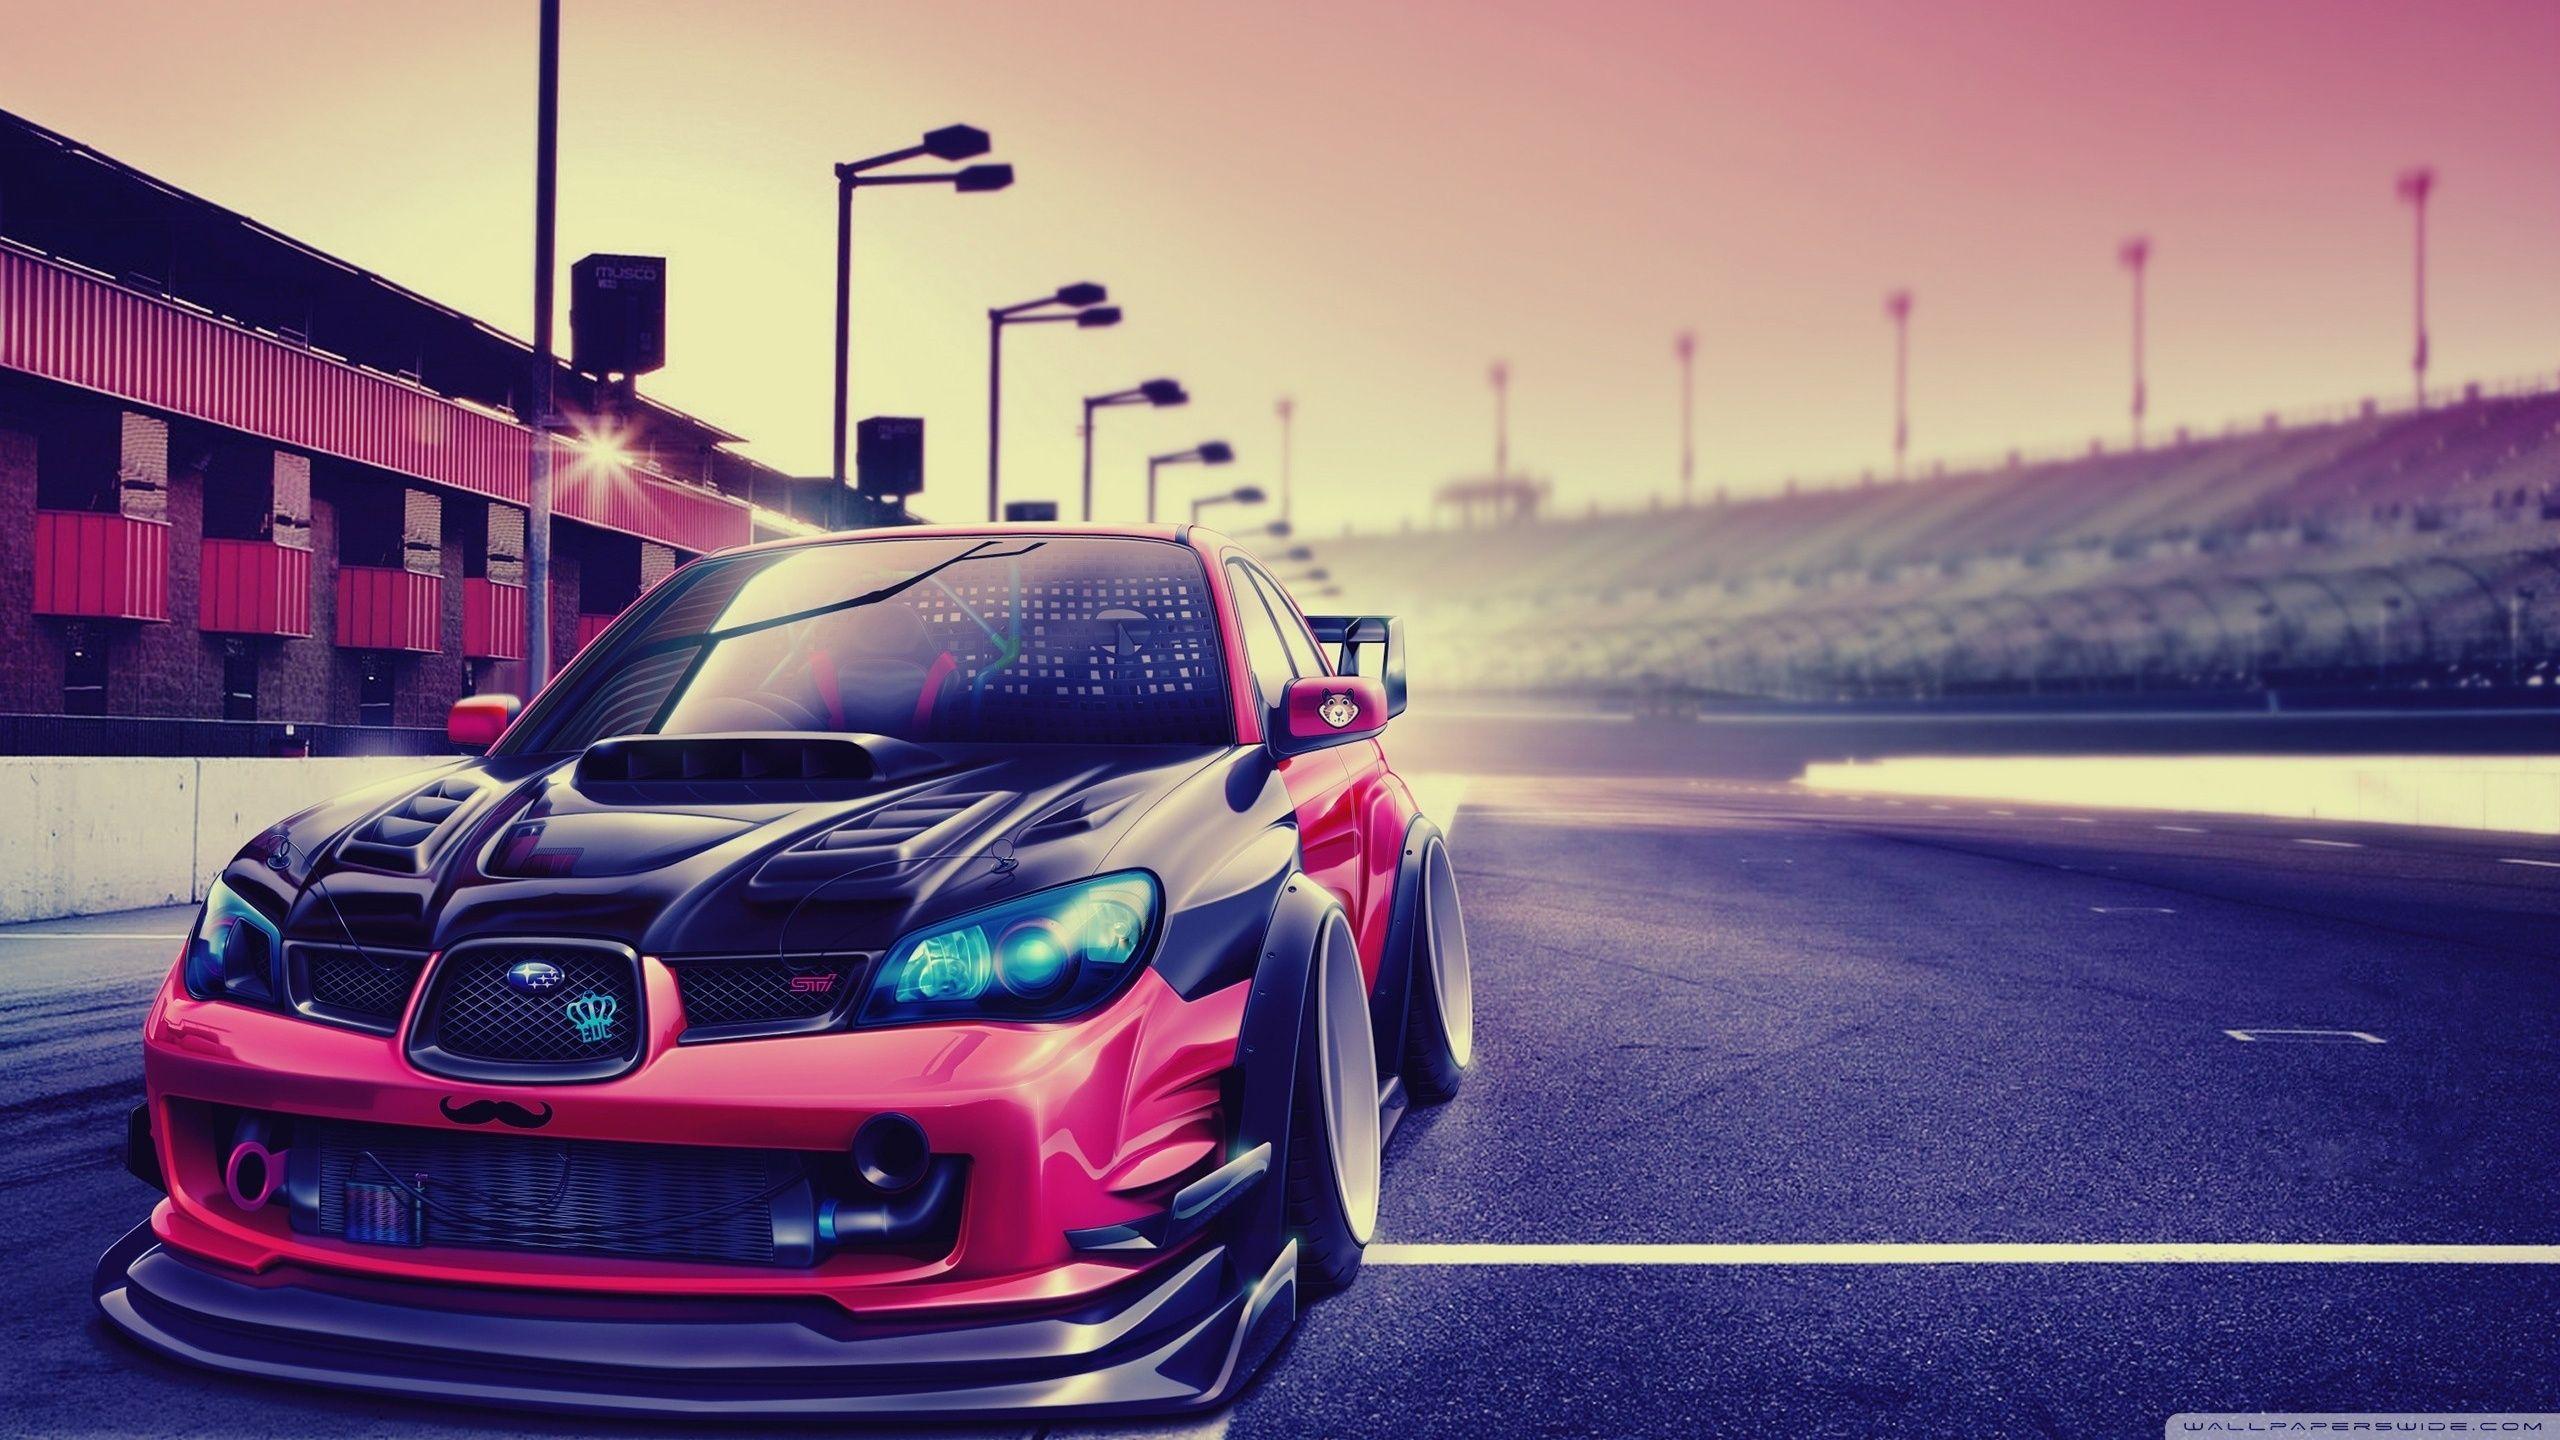 Auto Tuning Wallpapers Hd Wallpaper Cave